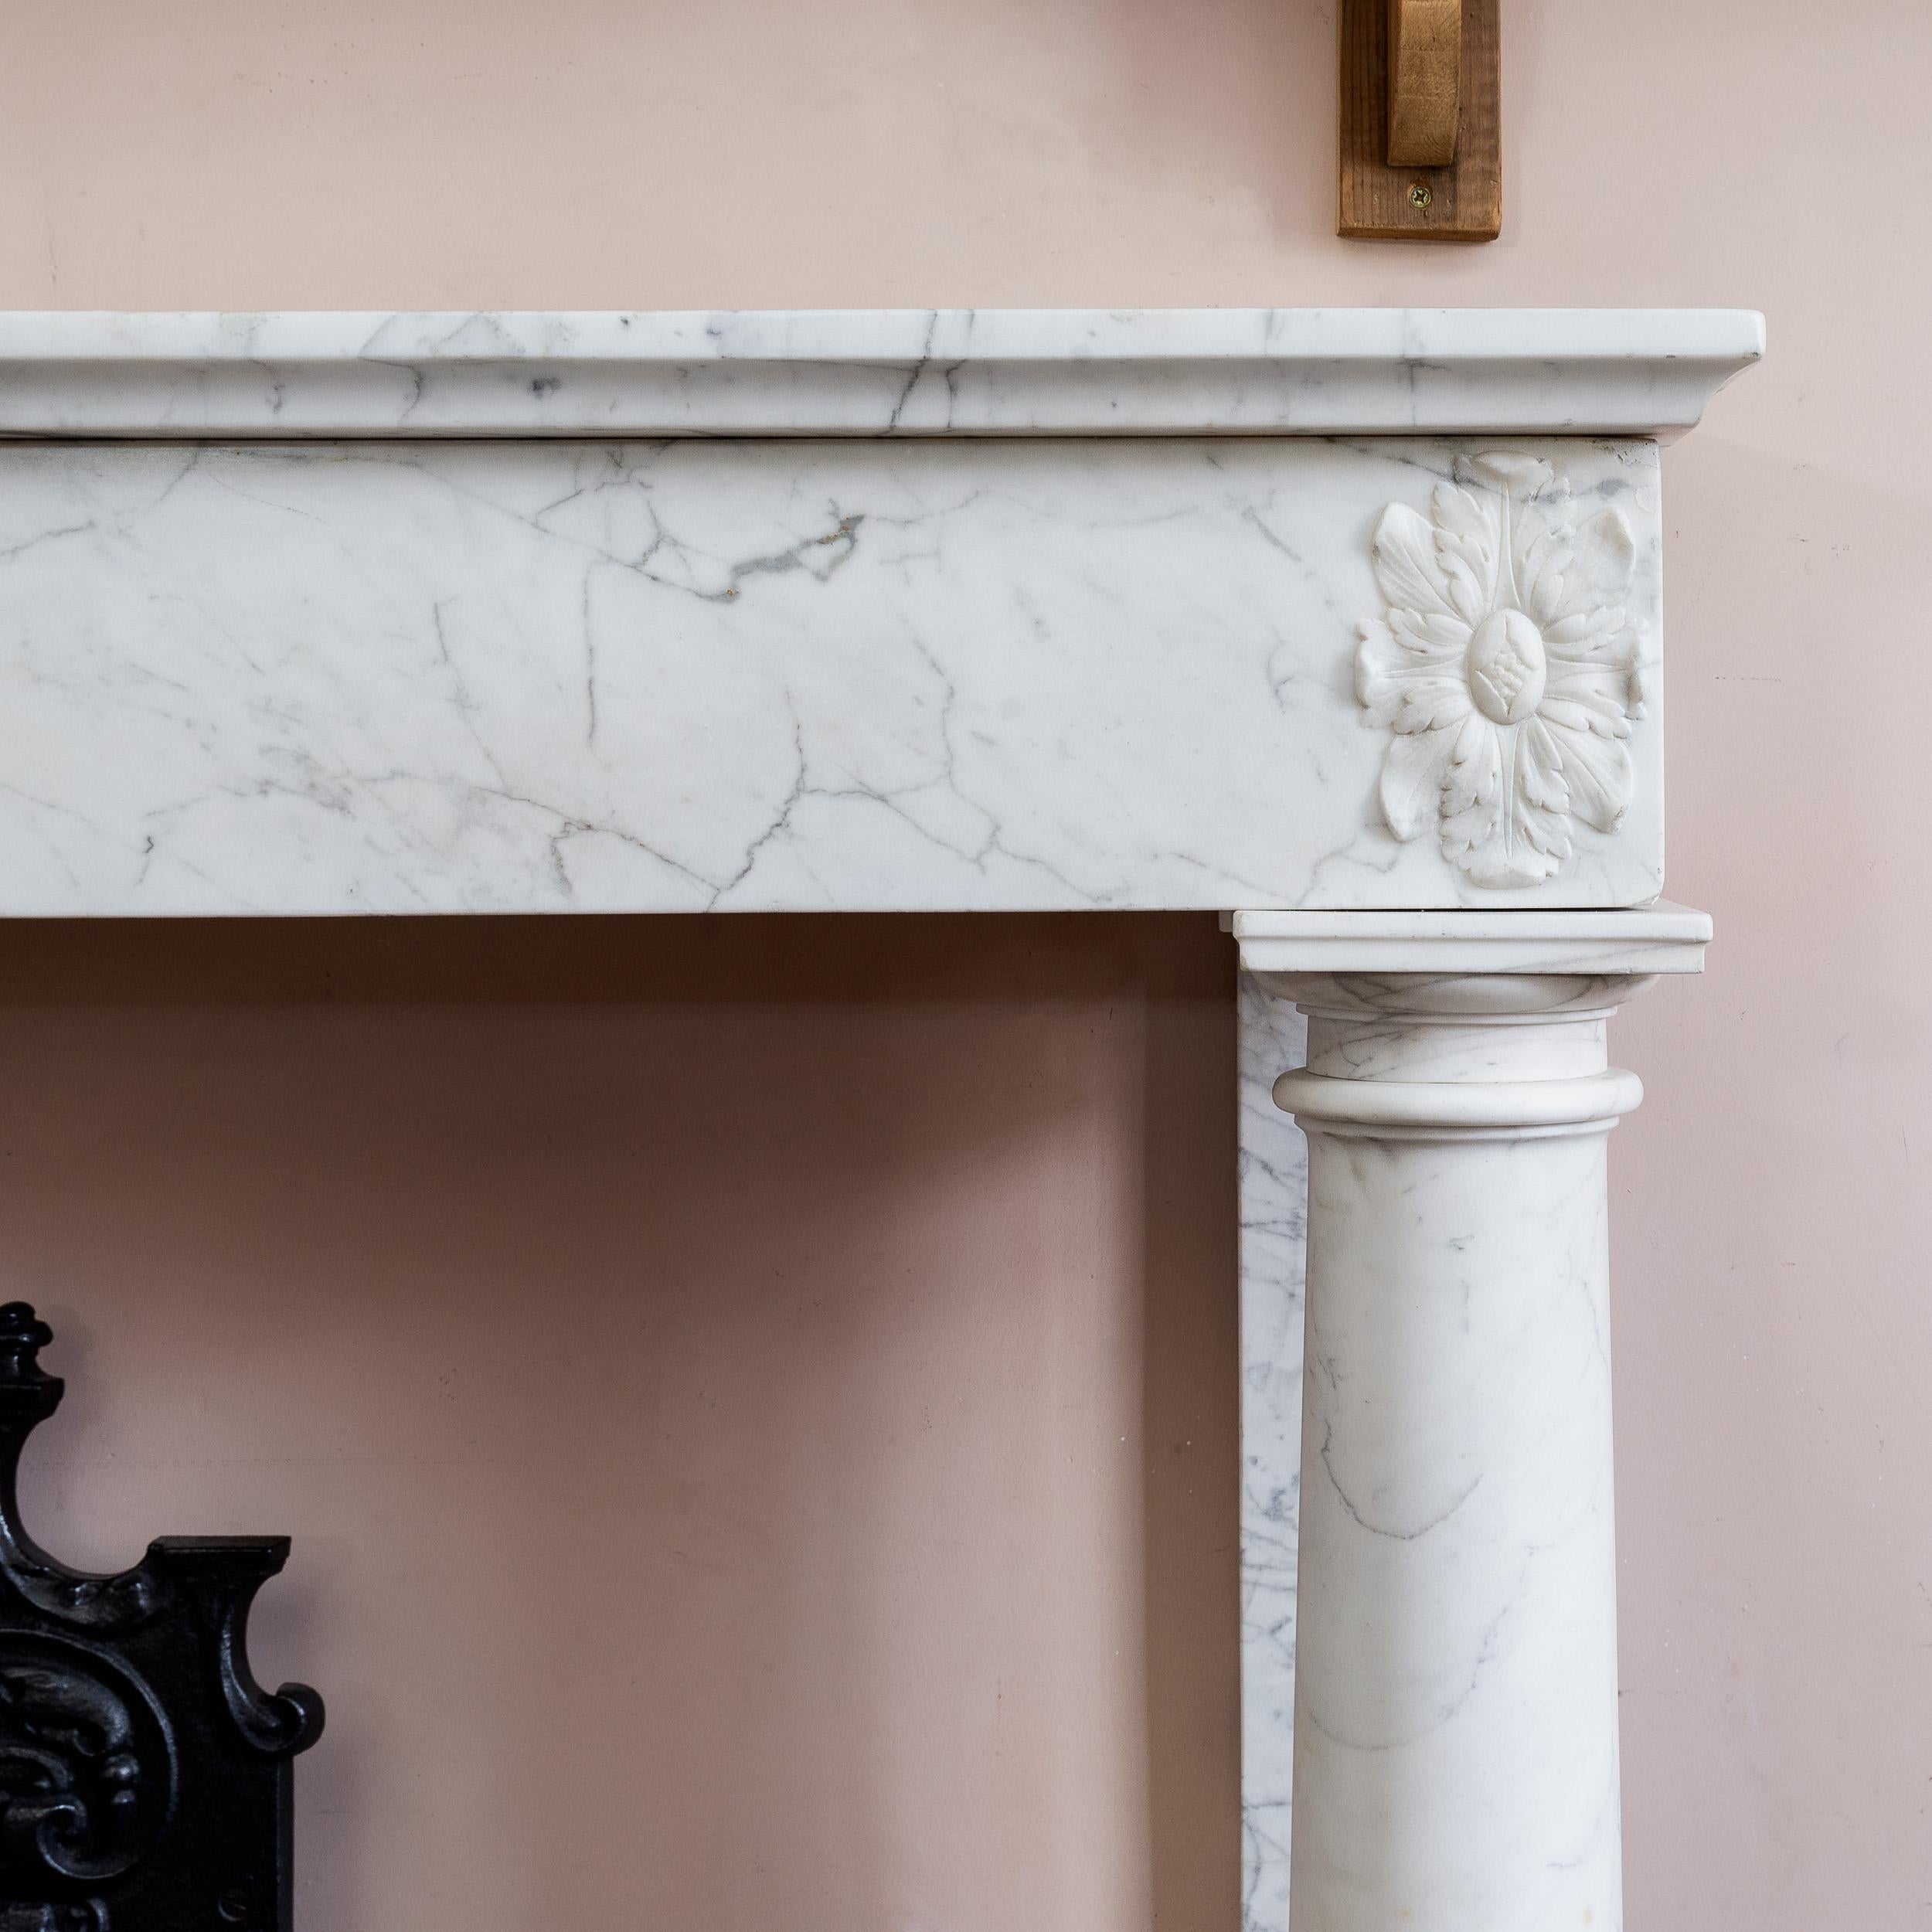 An early 19th century French Empire fireplace, the plain frieze with carved foliate paterae supported by disengaged Tuscan columns and pilasters, in Carrara marble, hearth not included (available separately).

A handsome, understated and stylish